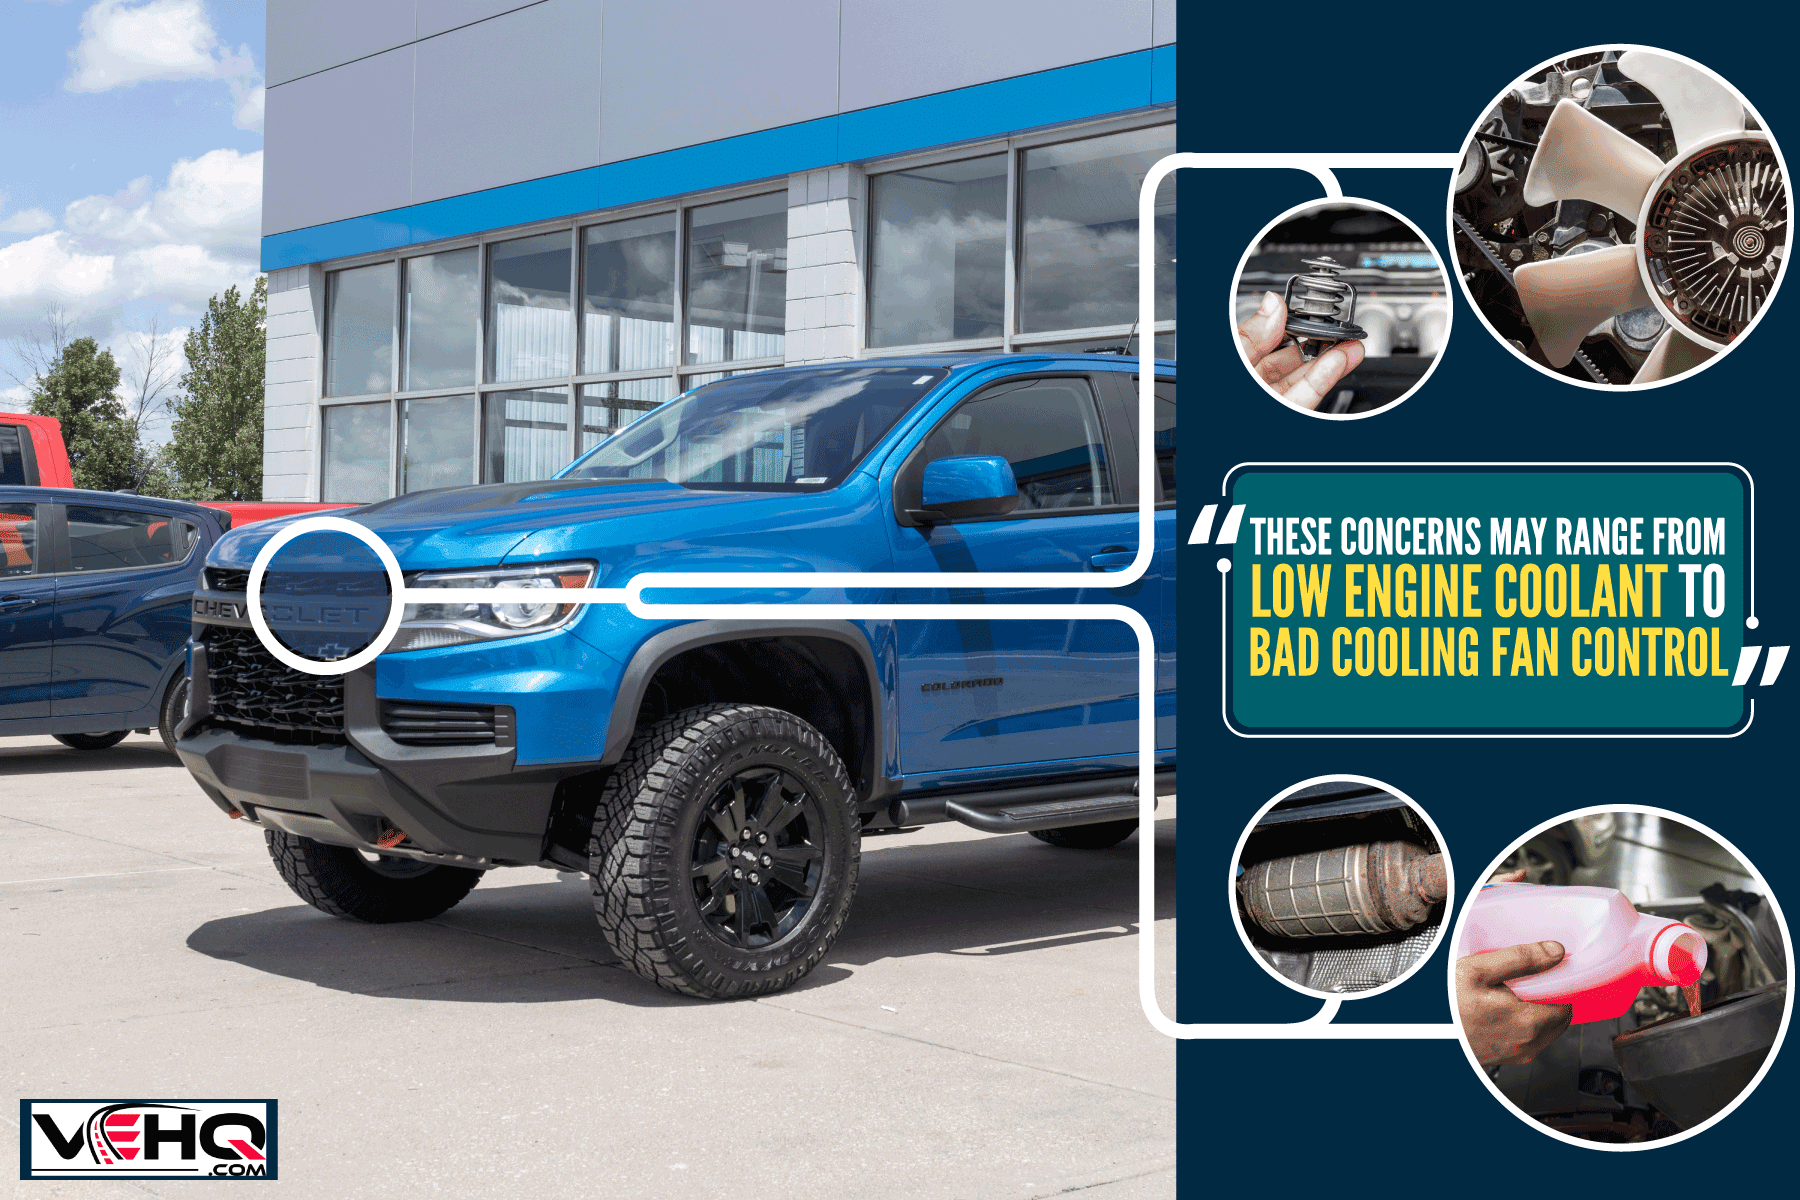 A blue colored Chevrolet Colorado at a dealership, Chevy Colorado Fan Stays On - What To Do?